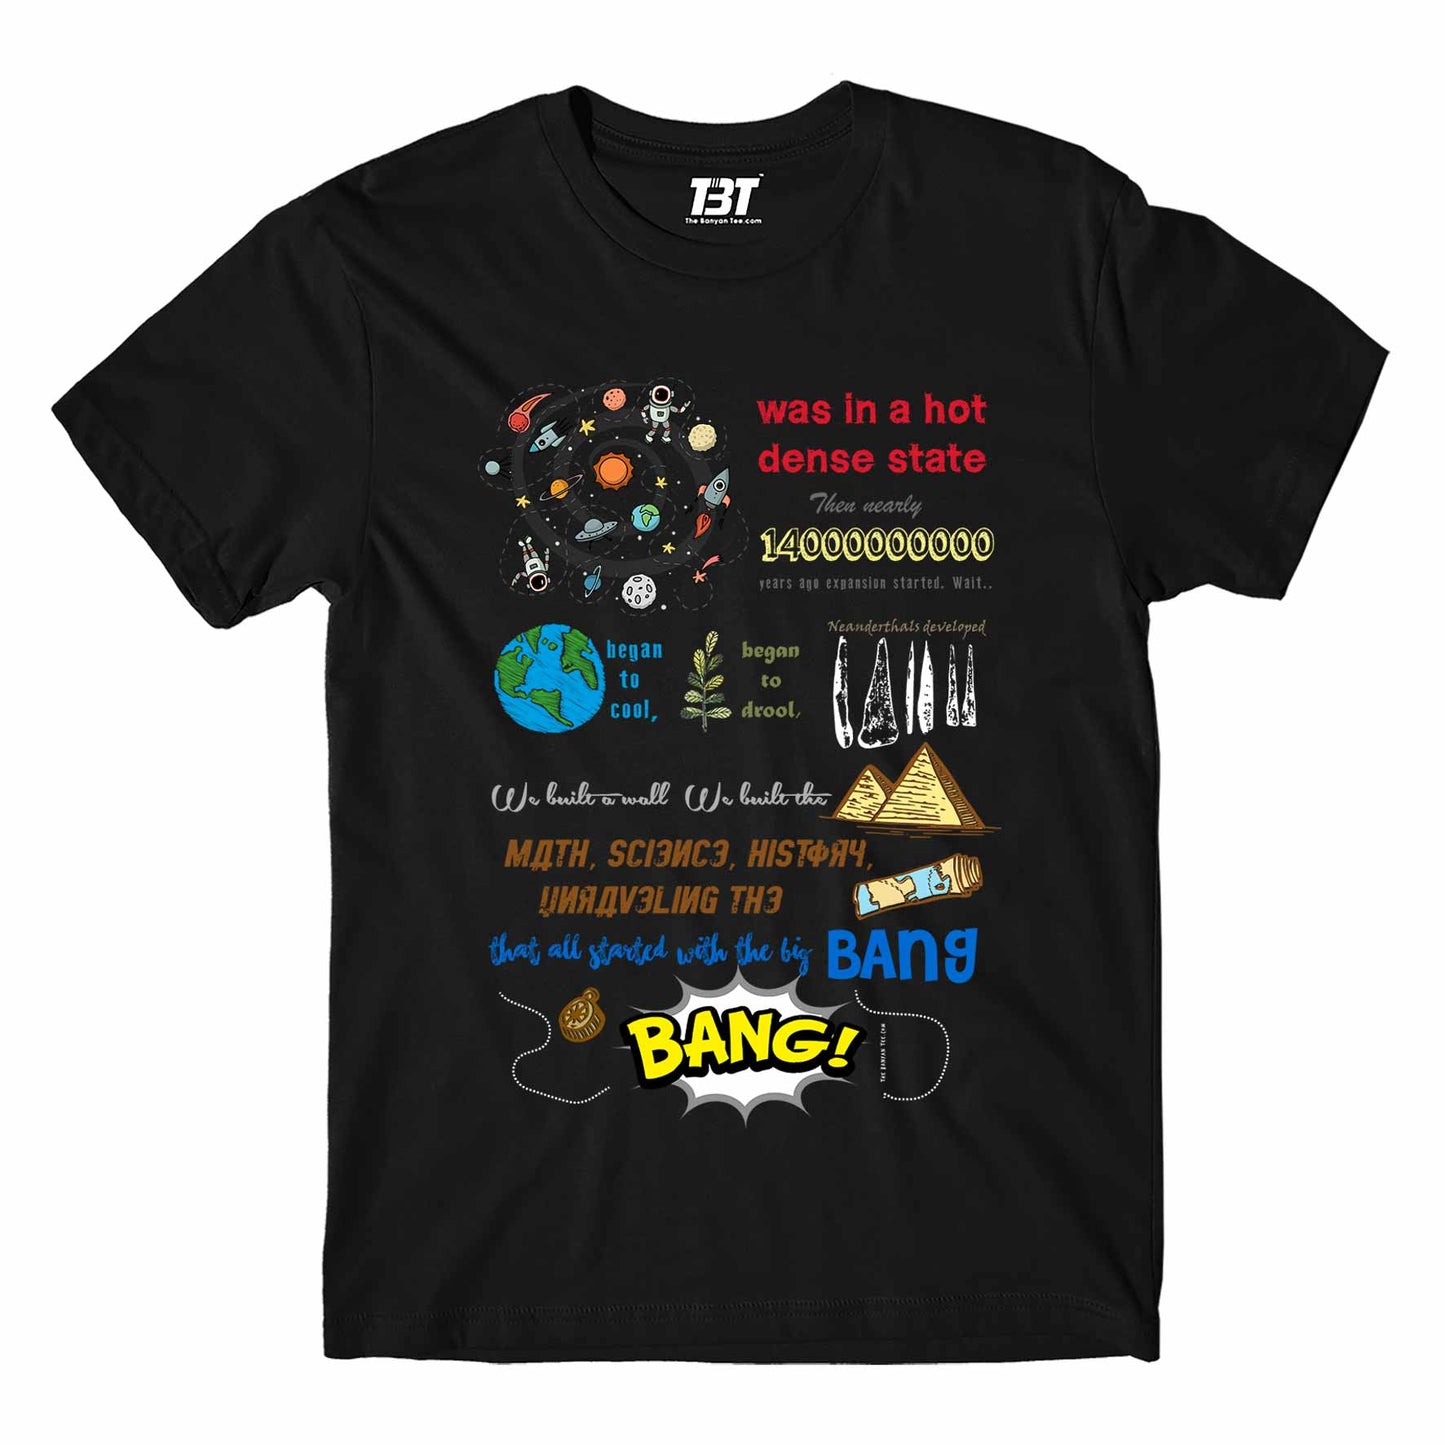 the banyan tee merch on sale The Big Bang Theory T shirt - On Sale - 4XL (Chest size 50 IN)